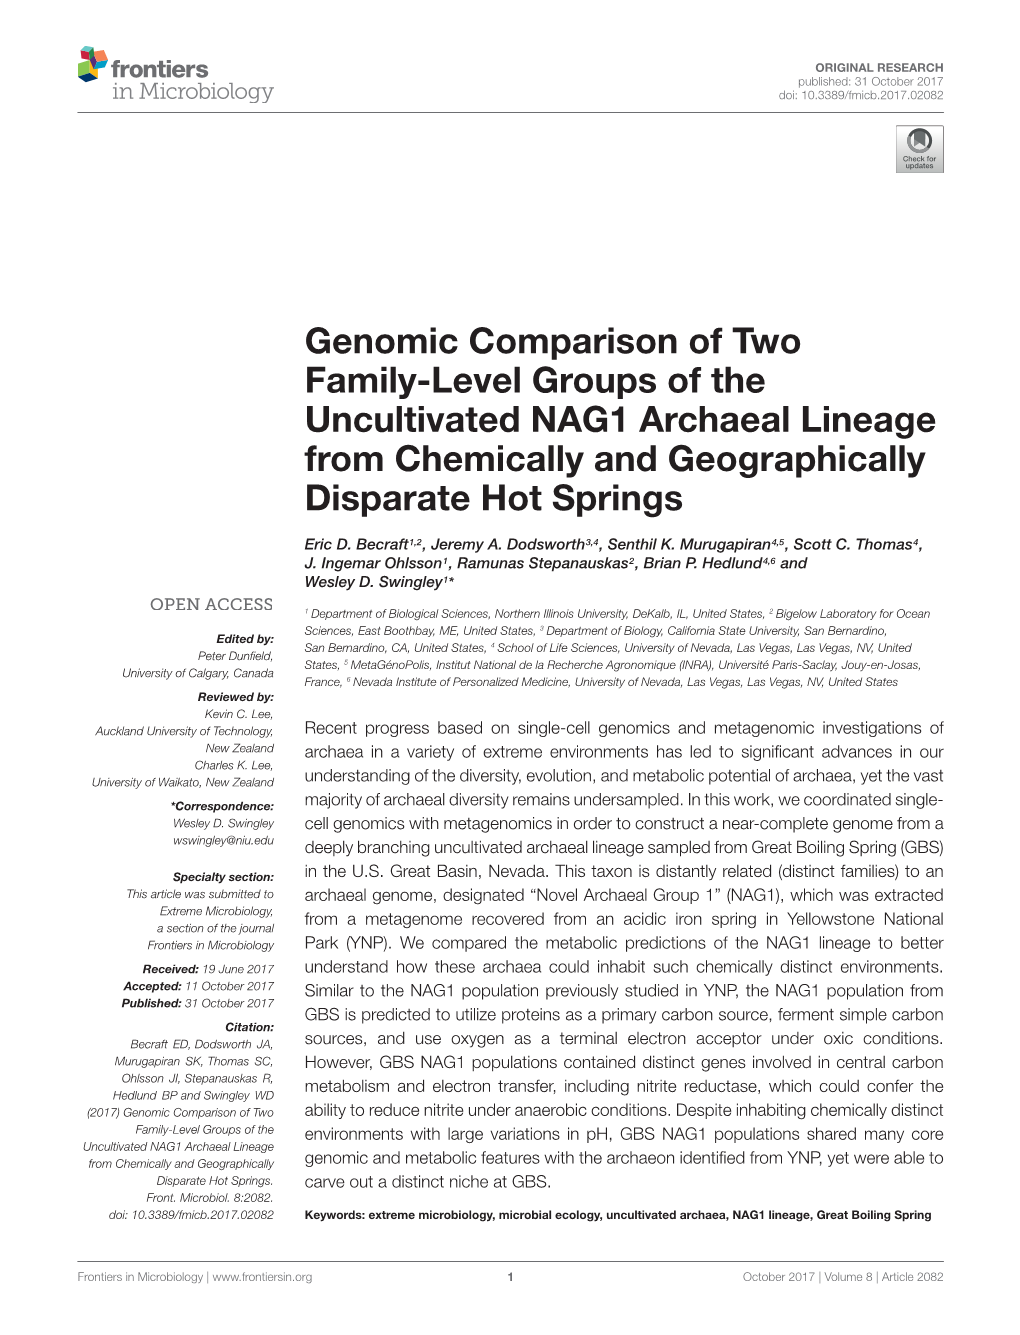 Genomic Comparison of Two Family-Level Groups of the Uncultivated NAG1 Archaeal Lineage from Chemically and Geographically Disparate Hot Springs